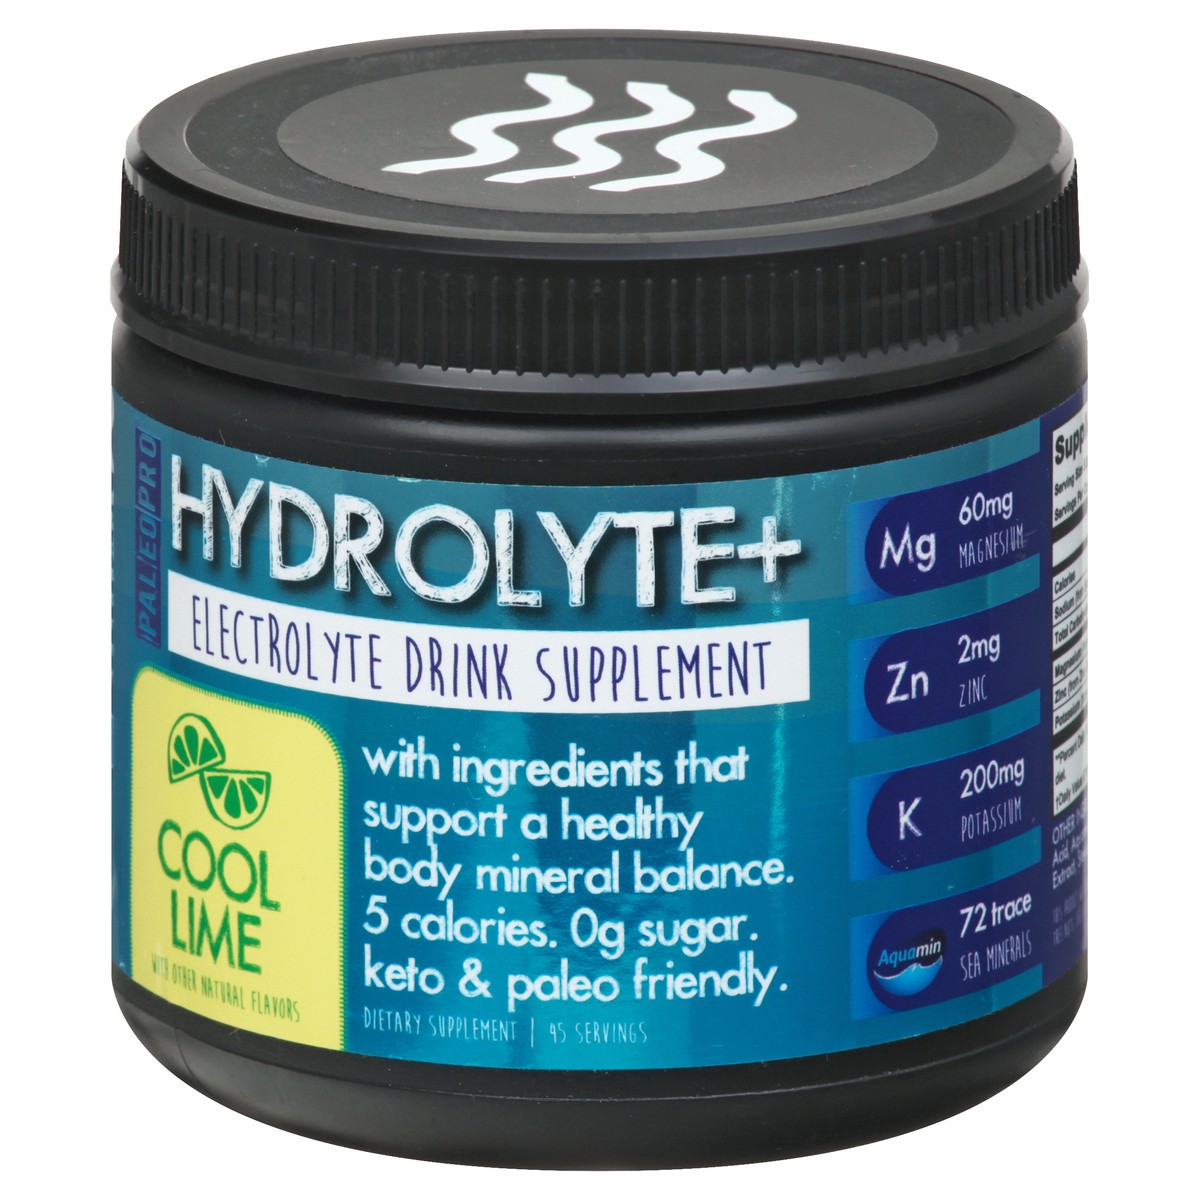 slide 10 of 13, PaleoPro Hydrolyte+ Cool Lime Electrolyte Drink Supplement 1 ea, 1 ct